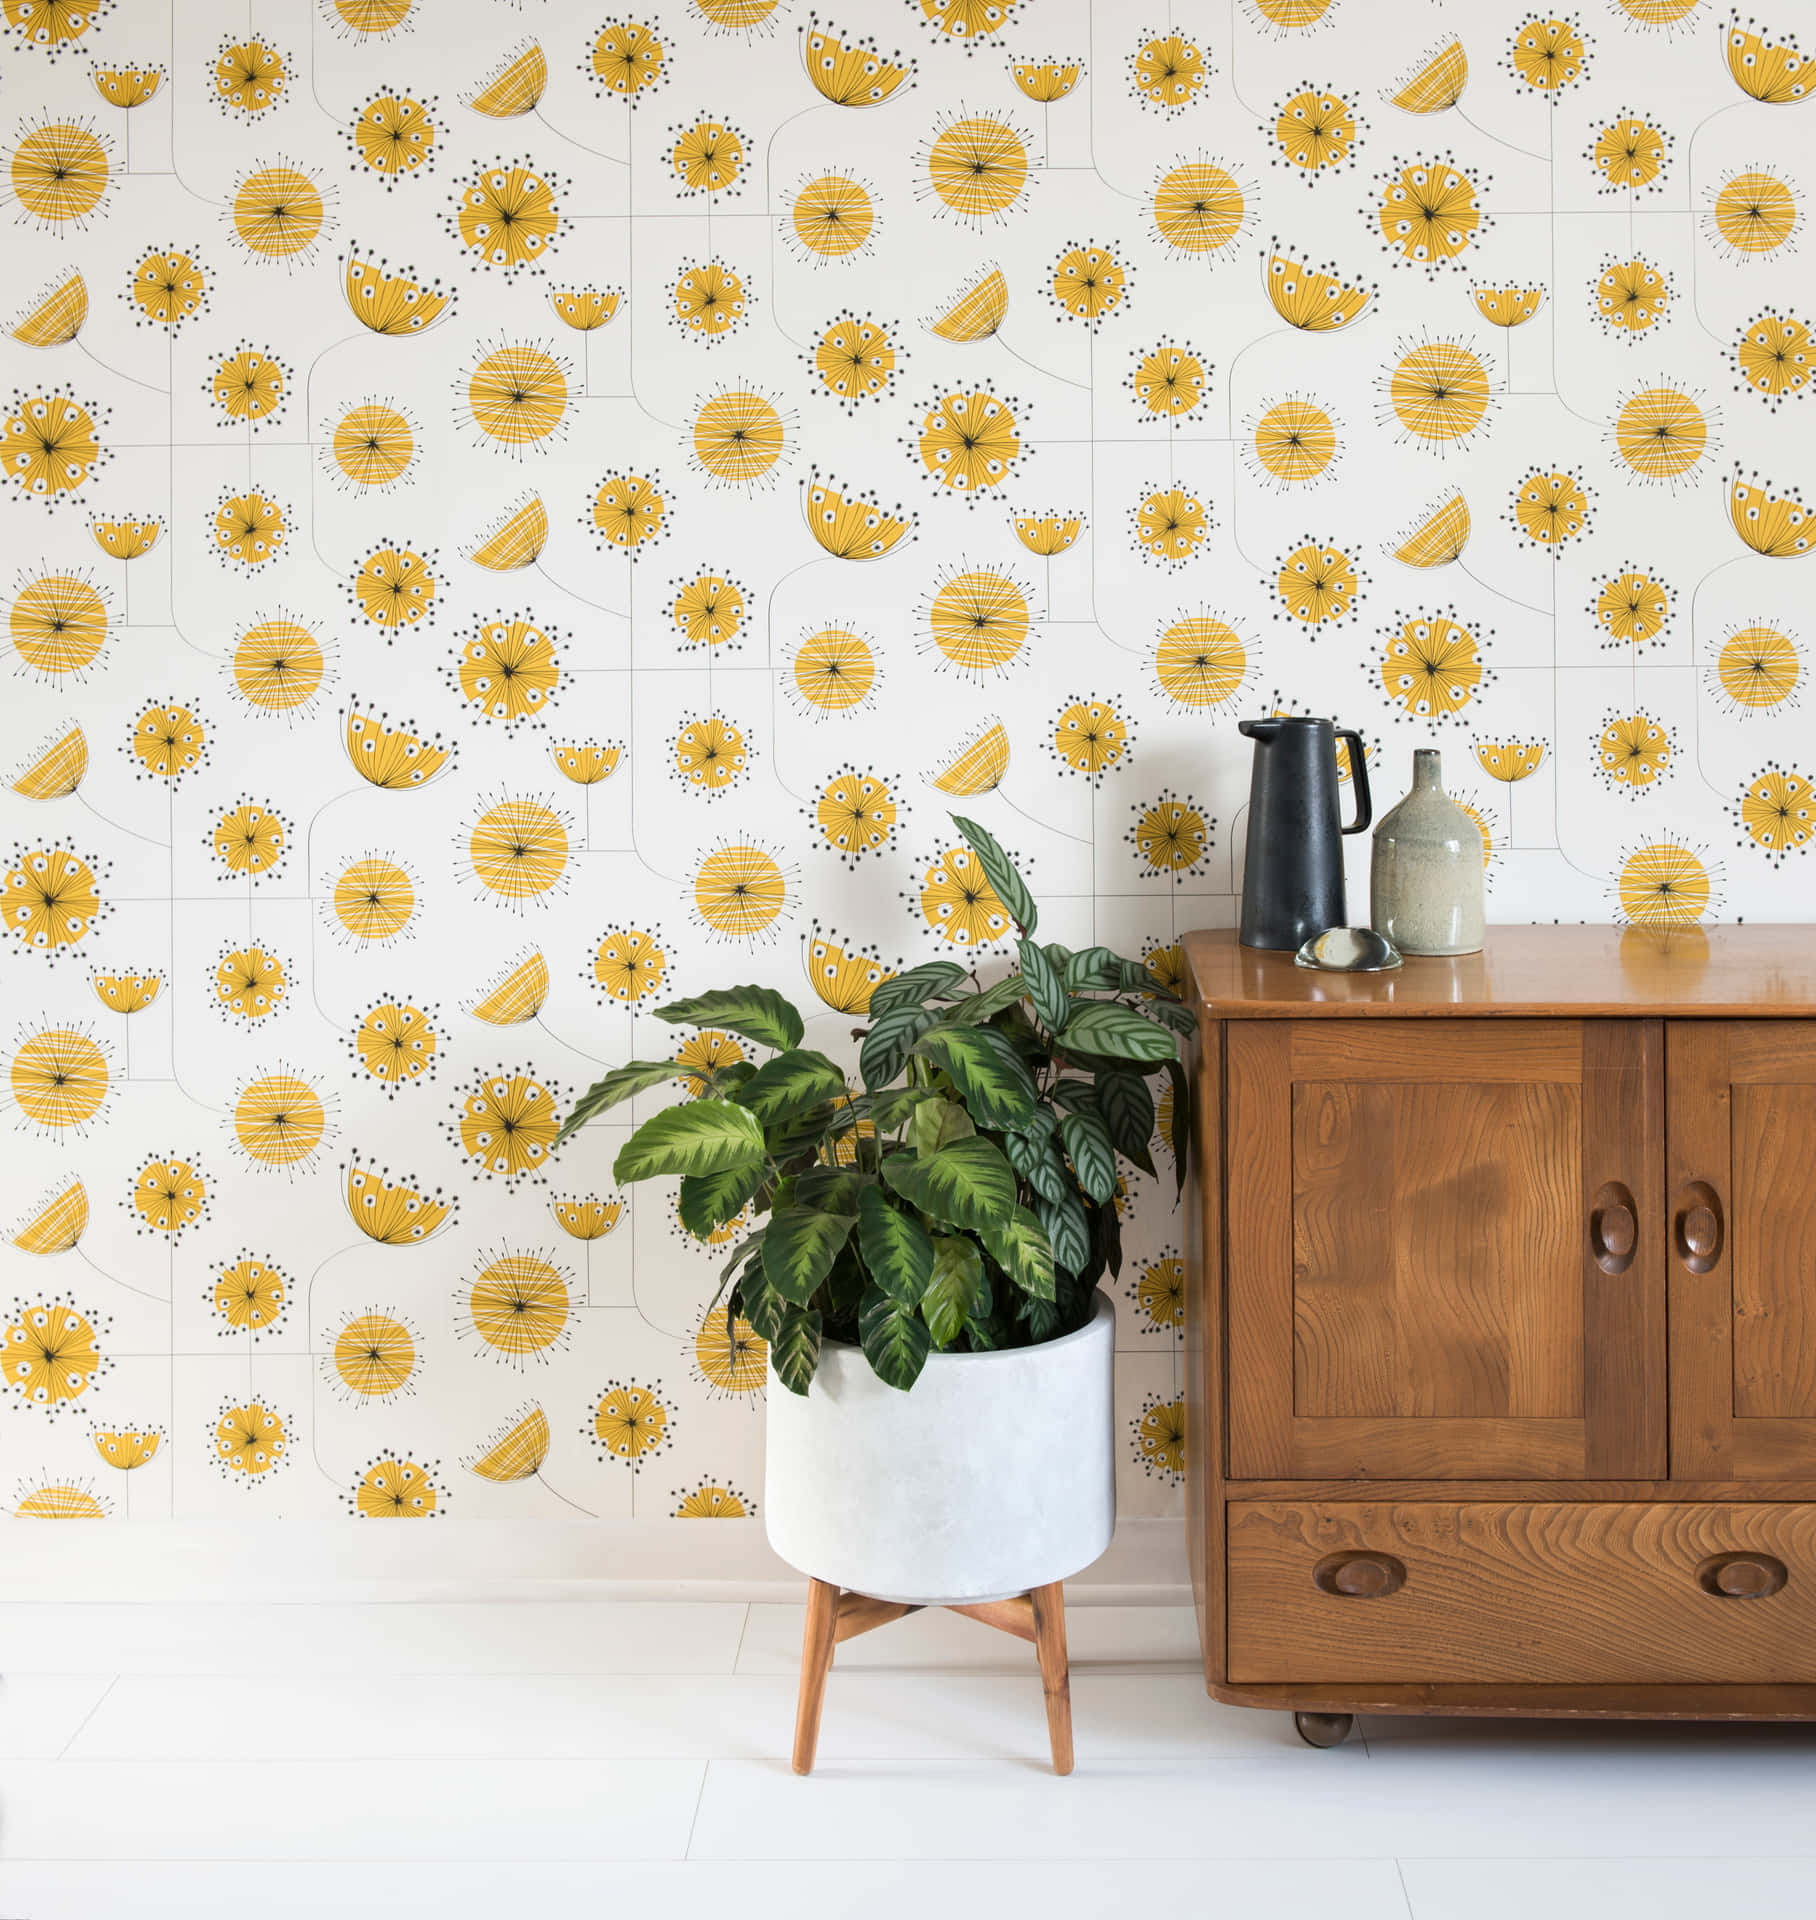 Enjoy the beauty of sunflowers with a bright, yellow hue Wallpaper